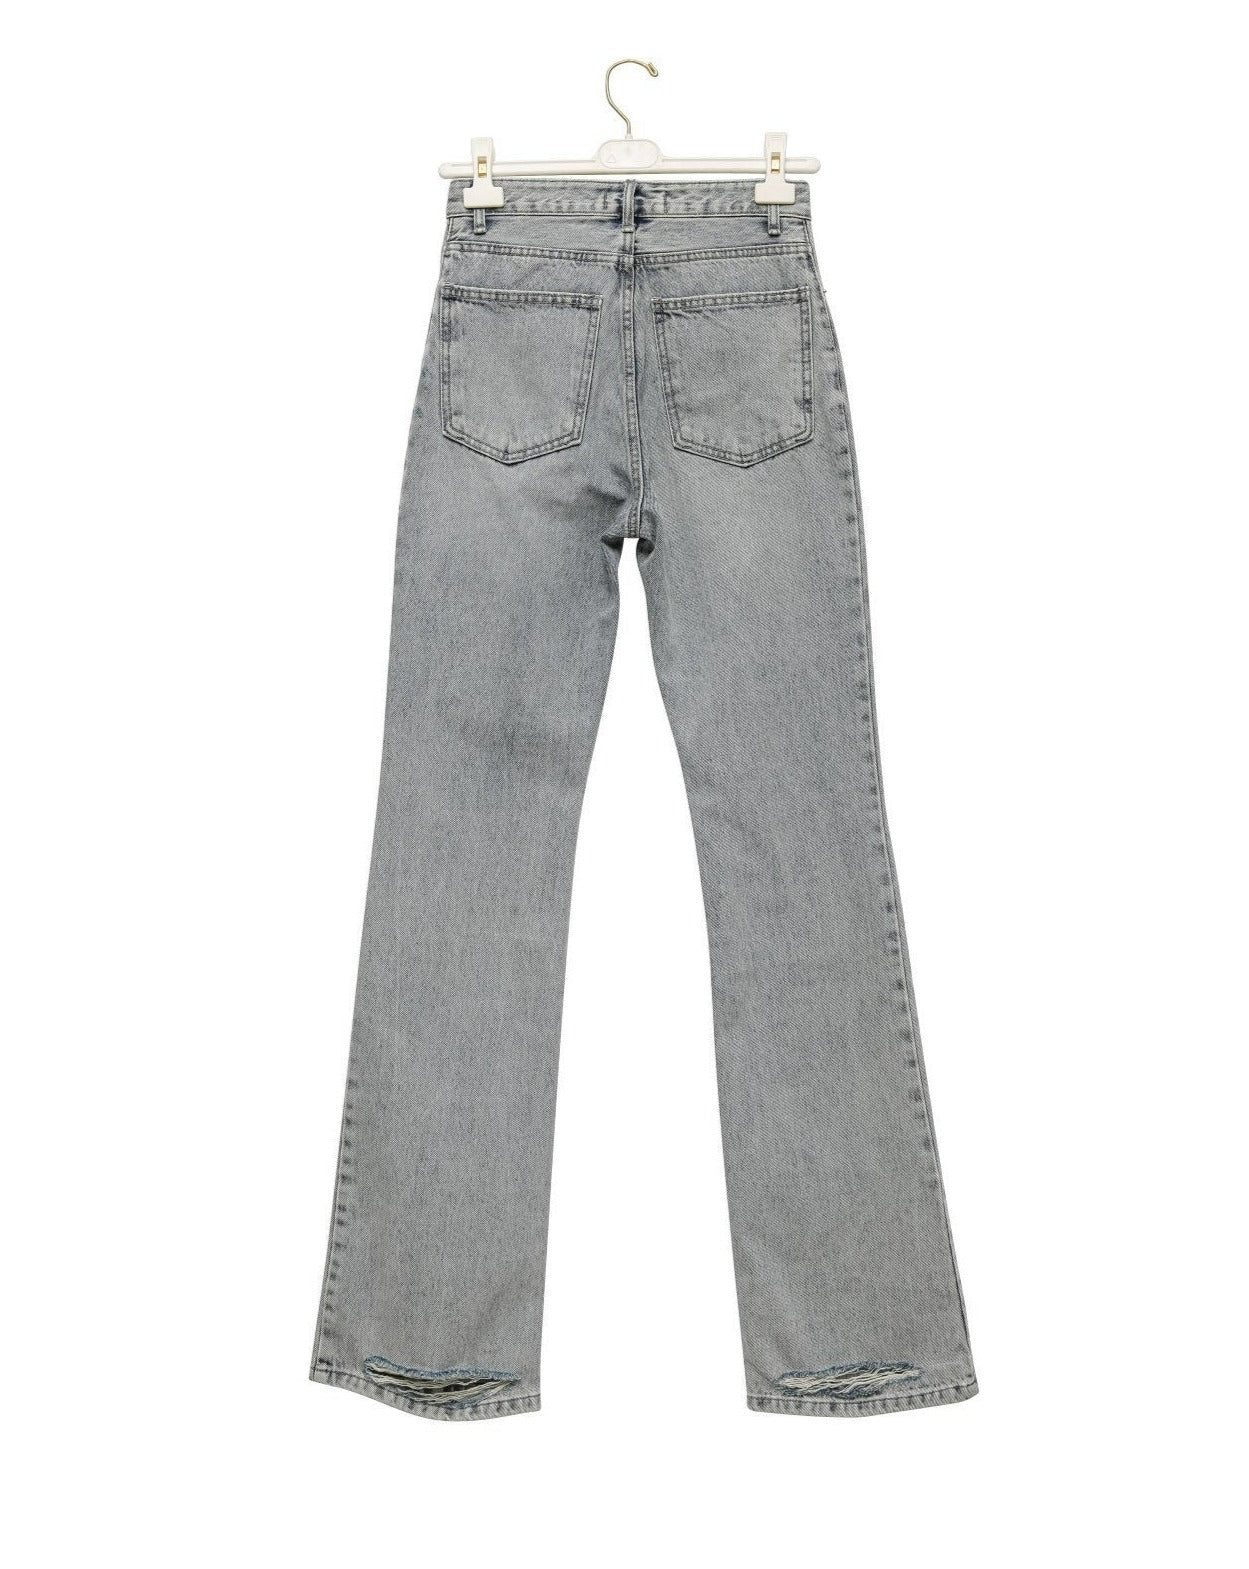 【PAPERMOON ペーパームーン】SS / Straight Boots Cut X - Ray Jeans